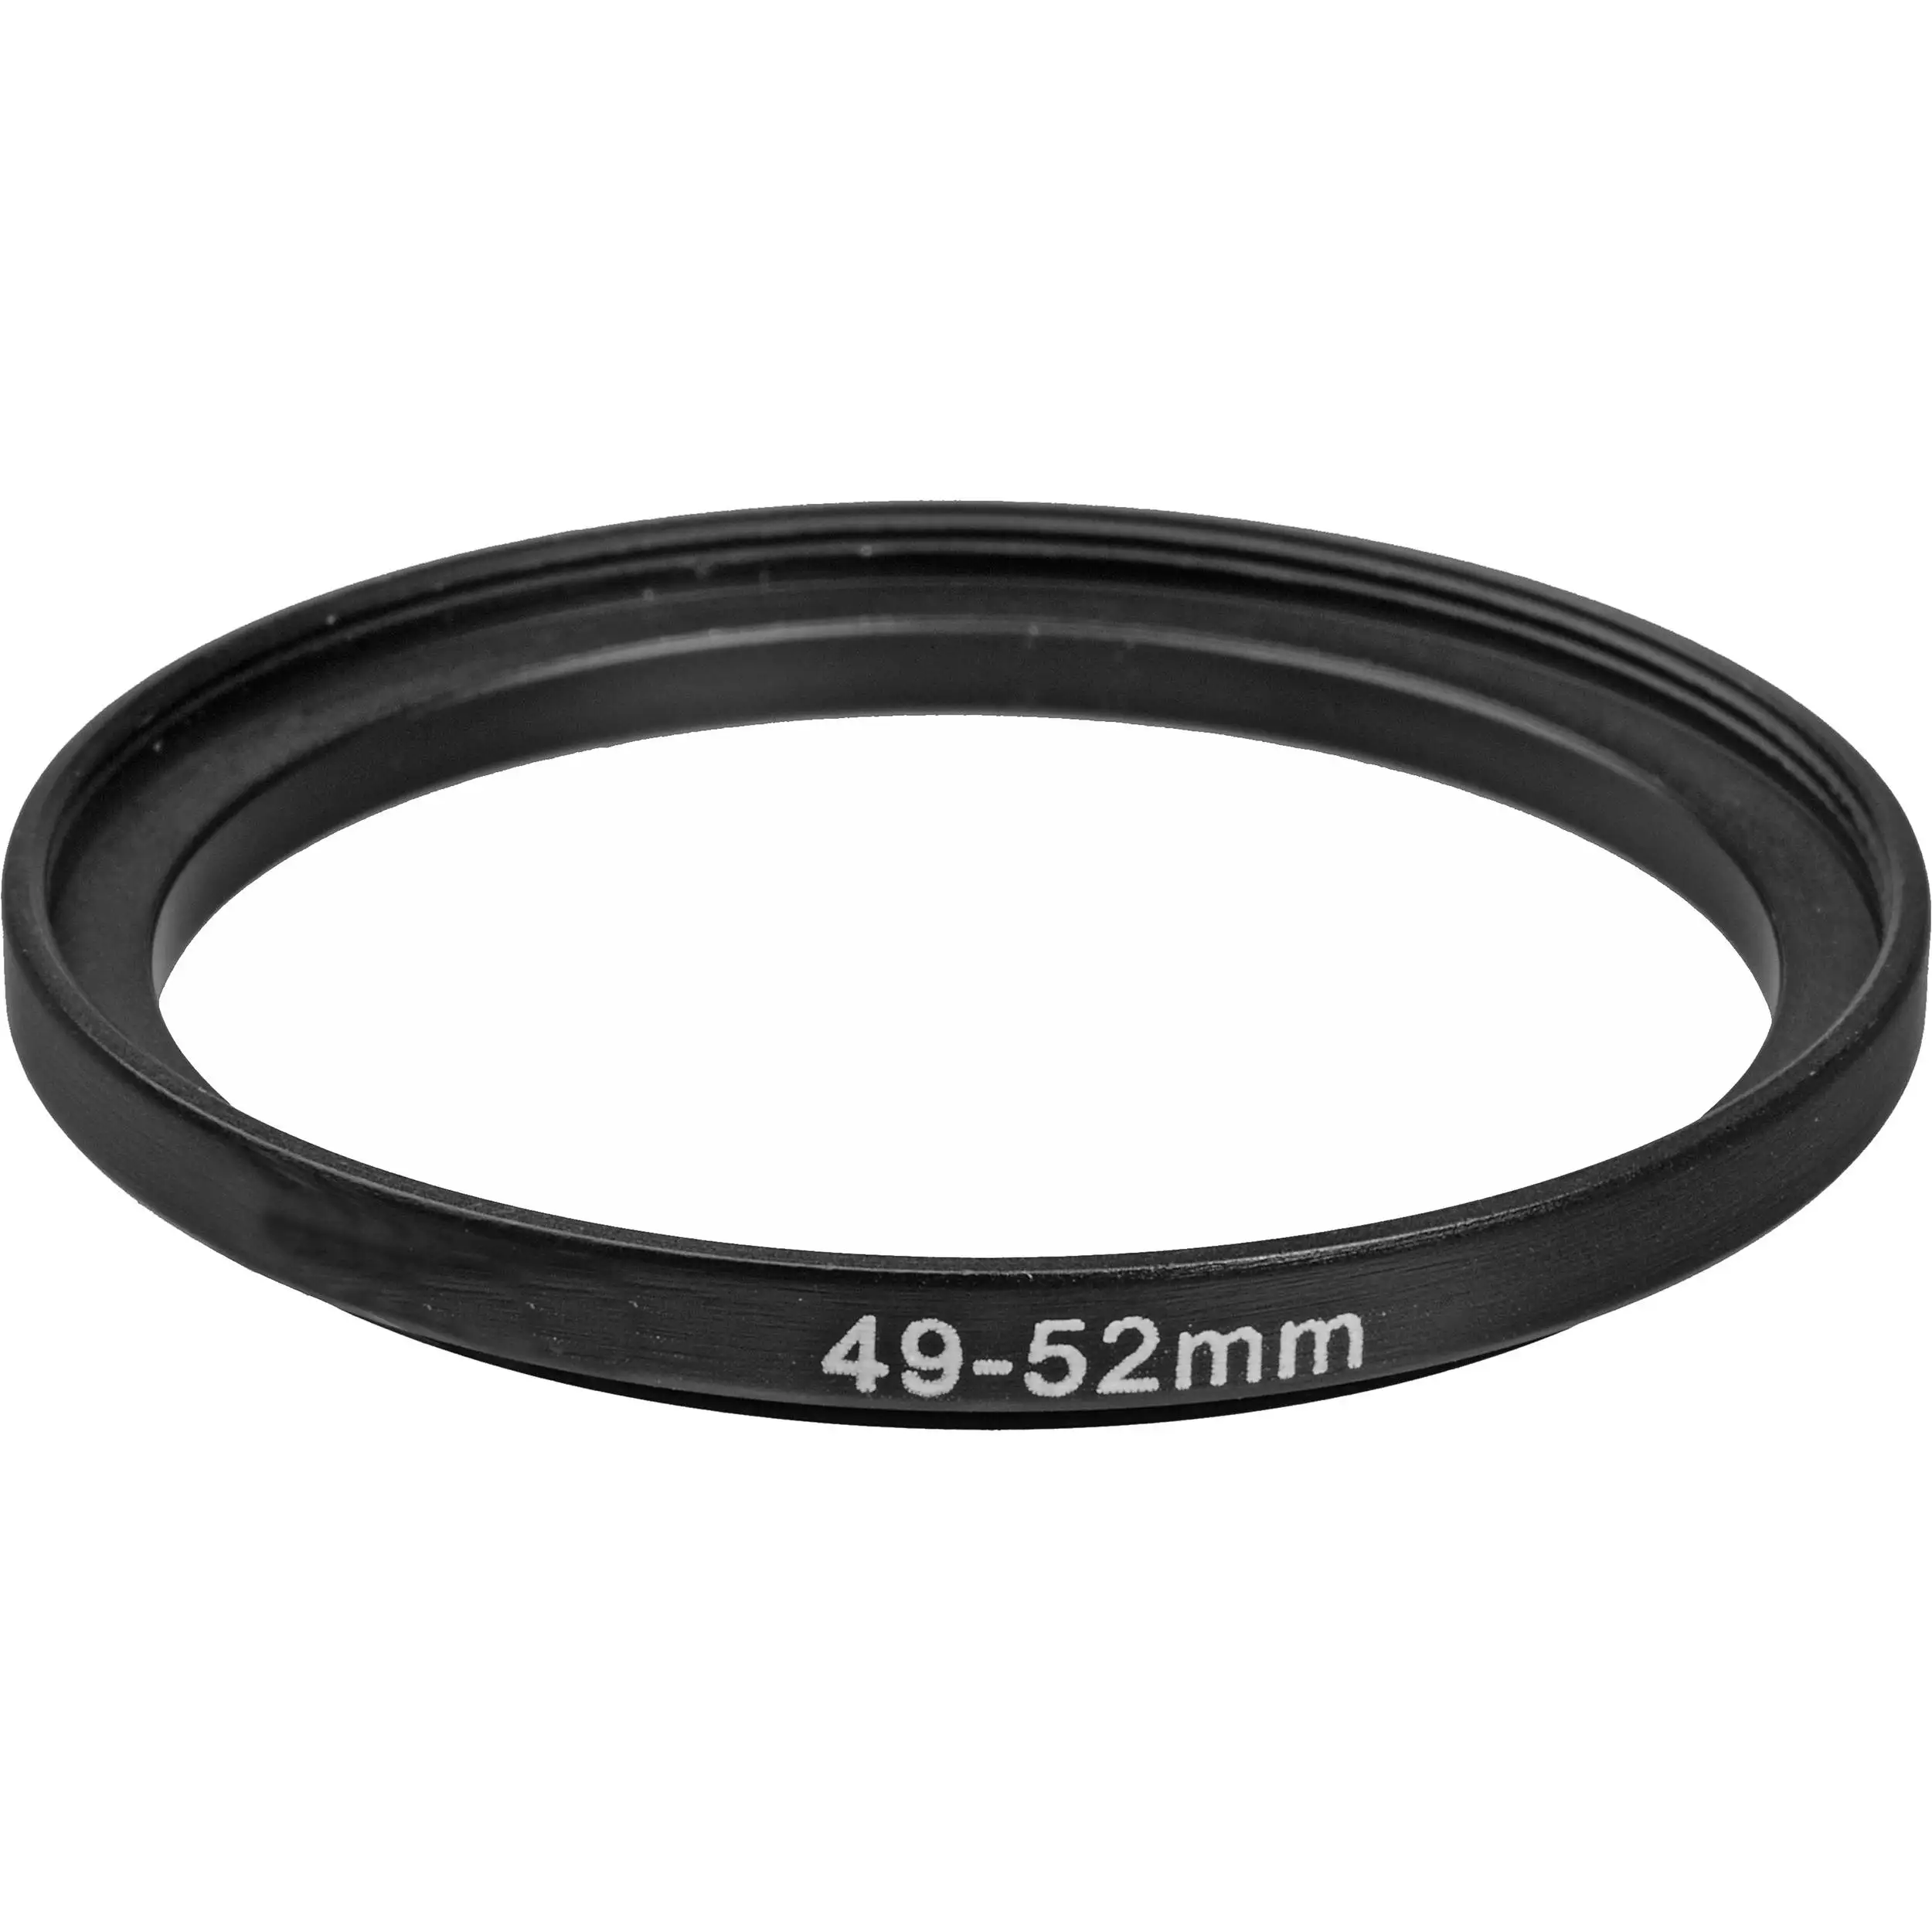 

Mettzchrom Filter Step Up Rings Adapter 49mm to 52 55 58 62 67 72 77 82 mm